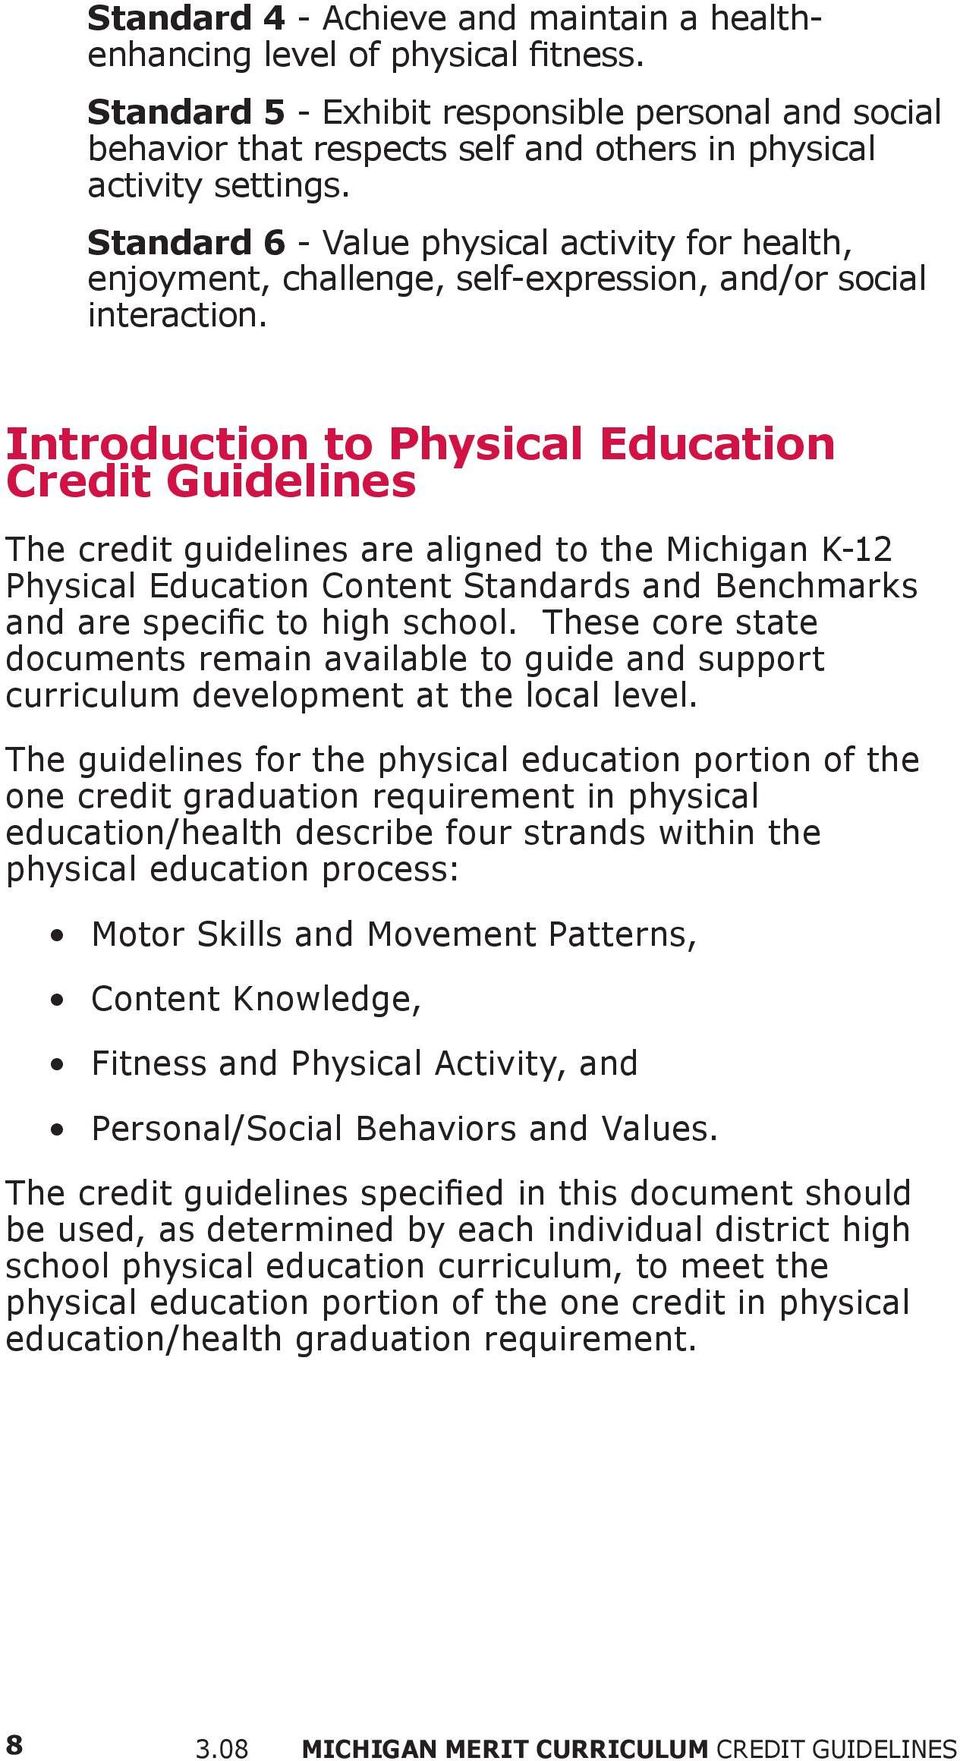 Standard 6 - Value physical activity for health, enjoyment, challenge, self-expression, and/or social interaction.